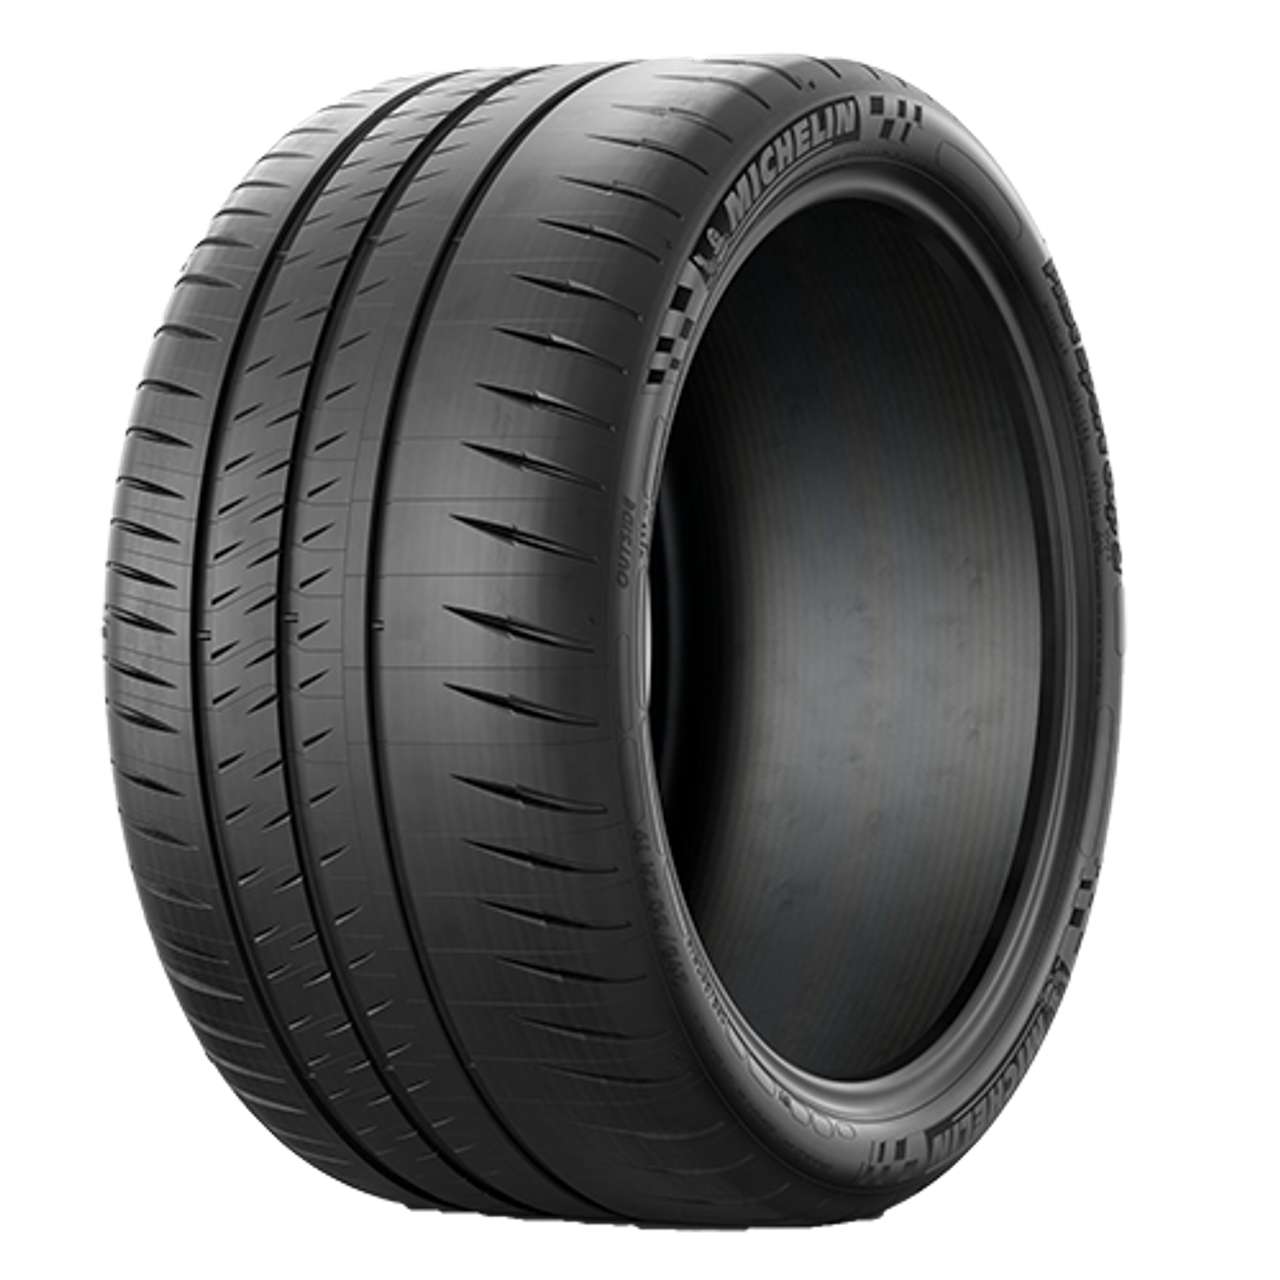 MICHELIN PILOT SPORT CUP 2 CONNECT 245/35ZR20 95(Y) LTS BSW XL